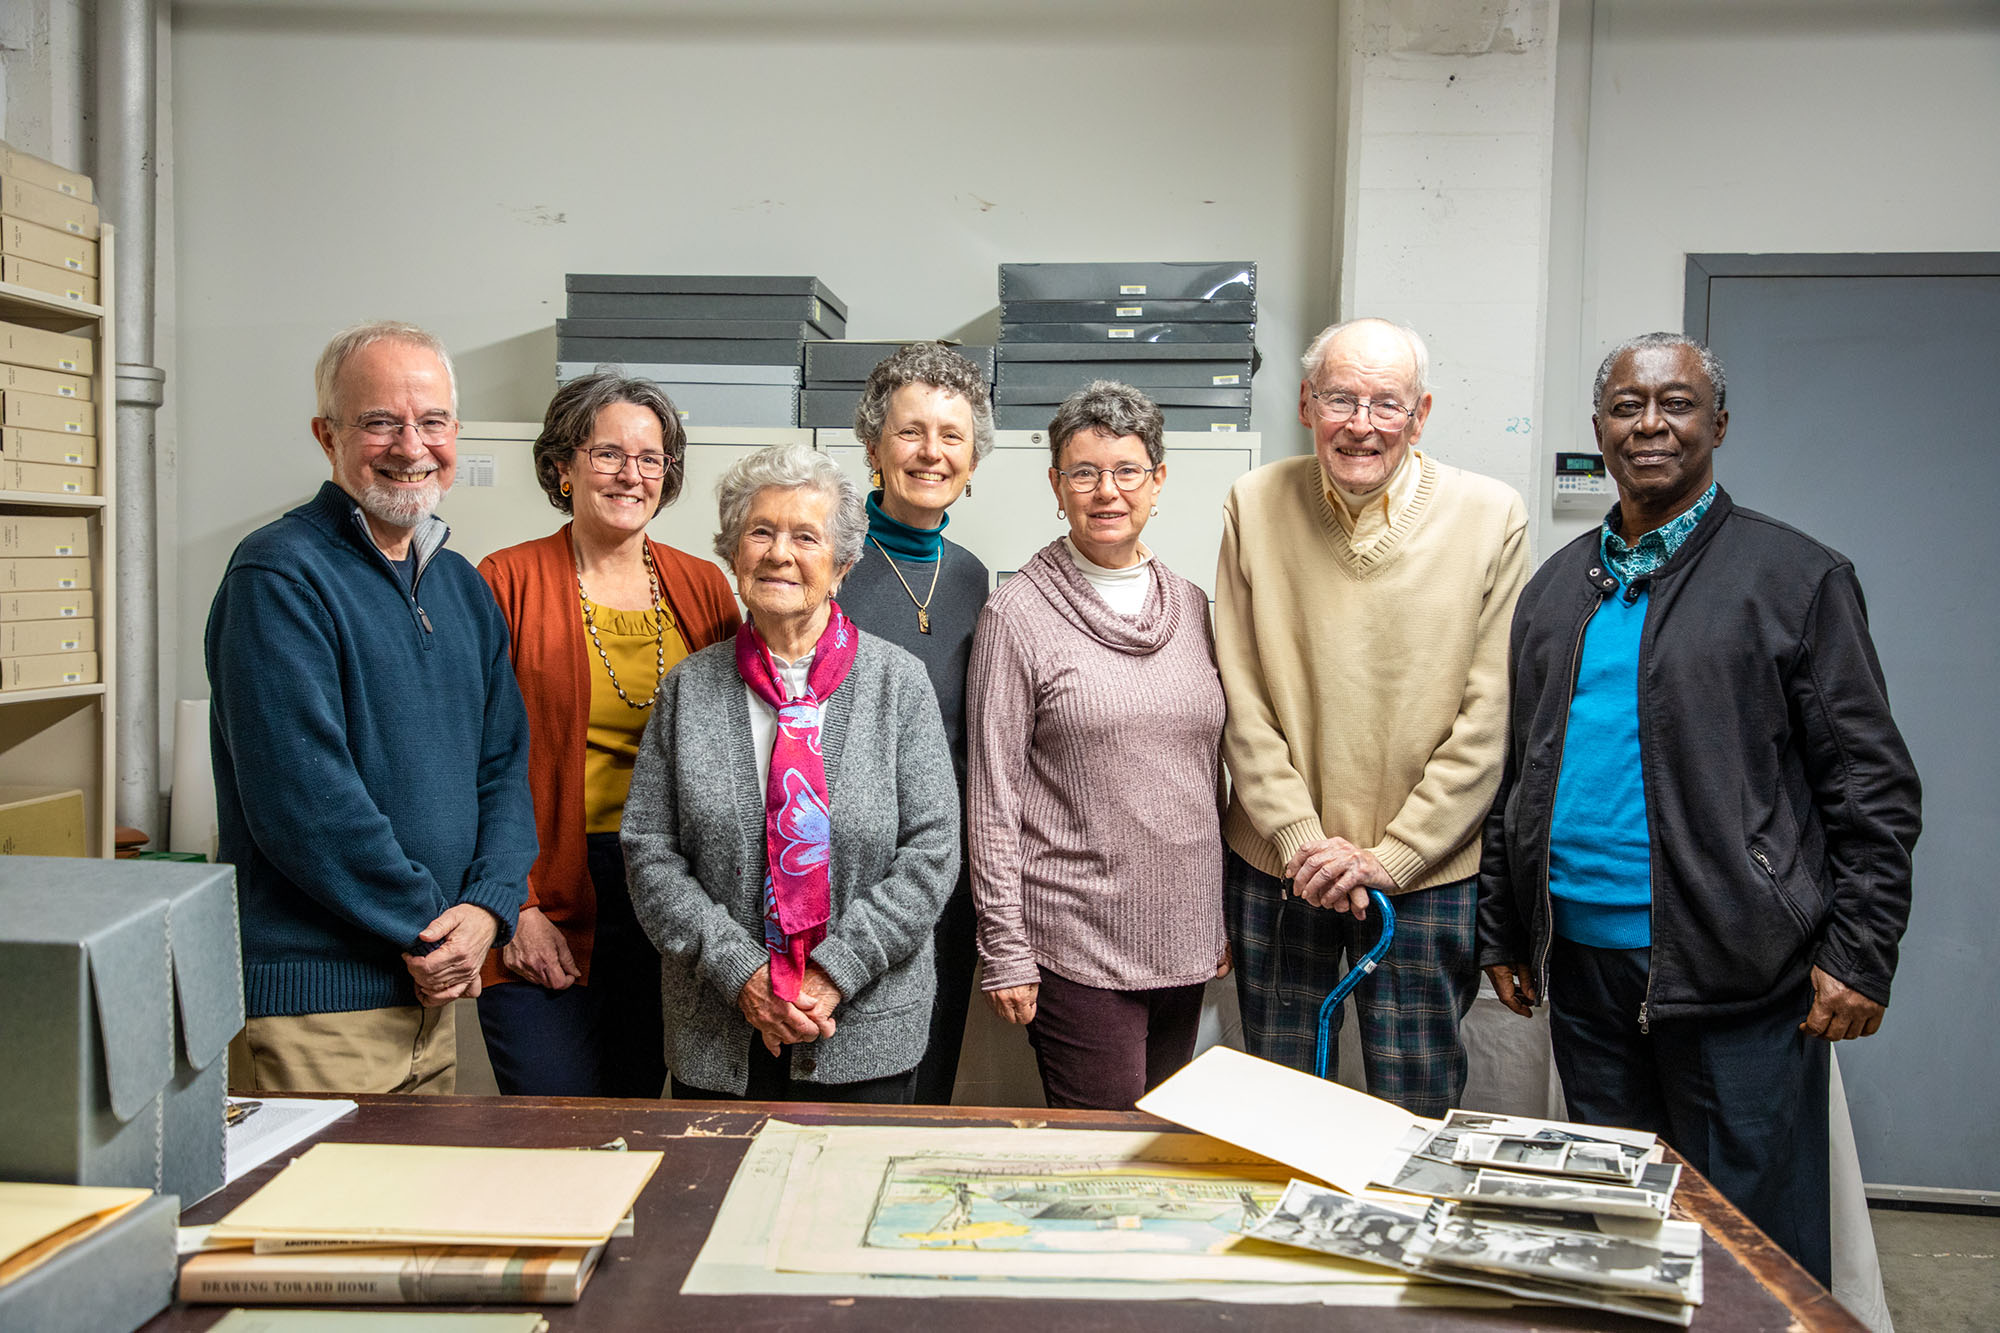 Seven of Royal Barry Wills's family members visiting the Library & Archives pose in front of a table with the architect's sketches.